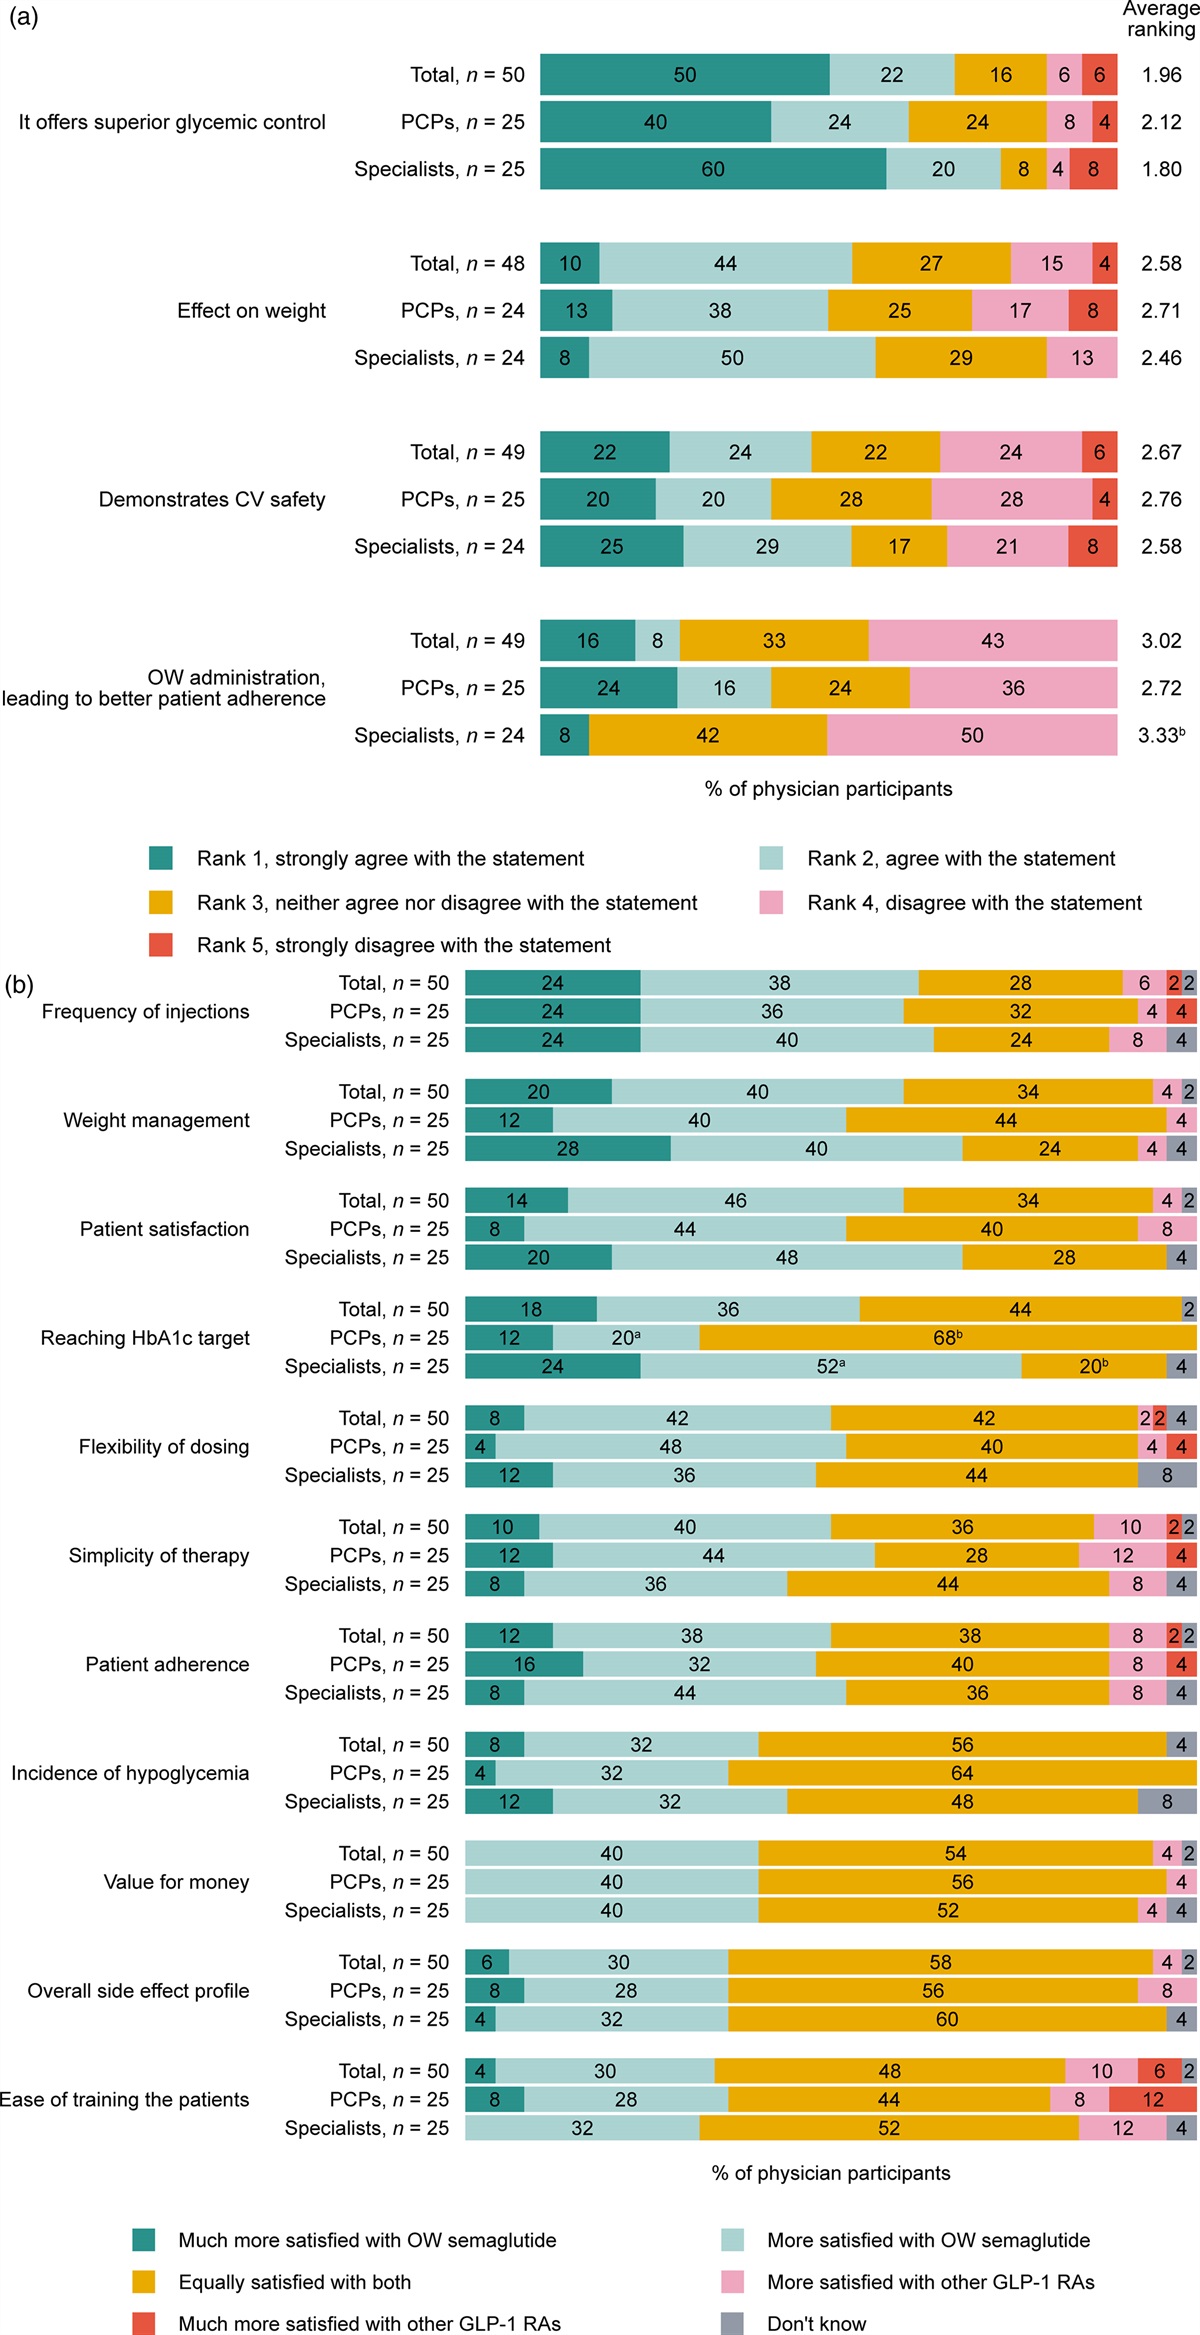 A survey of physician experience and treatment satisfaction prescribing once-weekly semaglutide injections for patients with type 2 diabetes in Canada